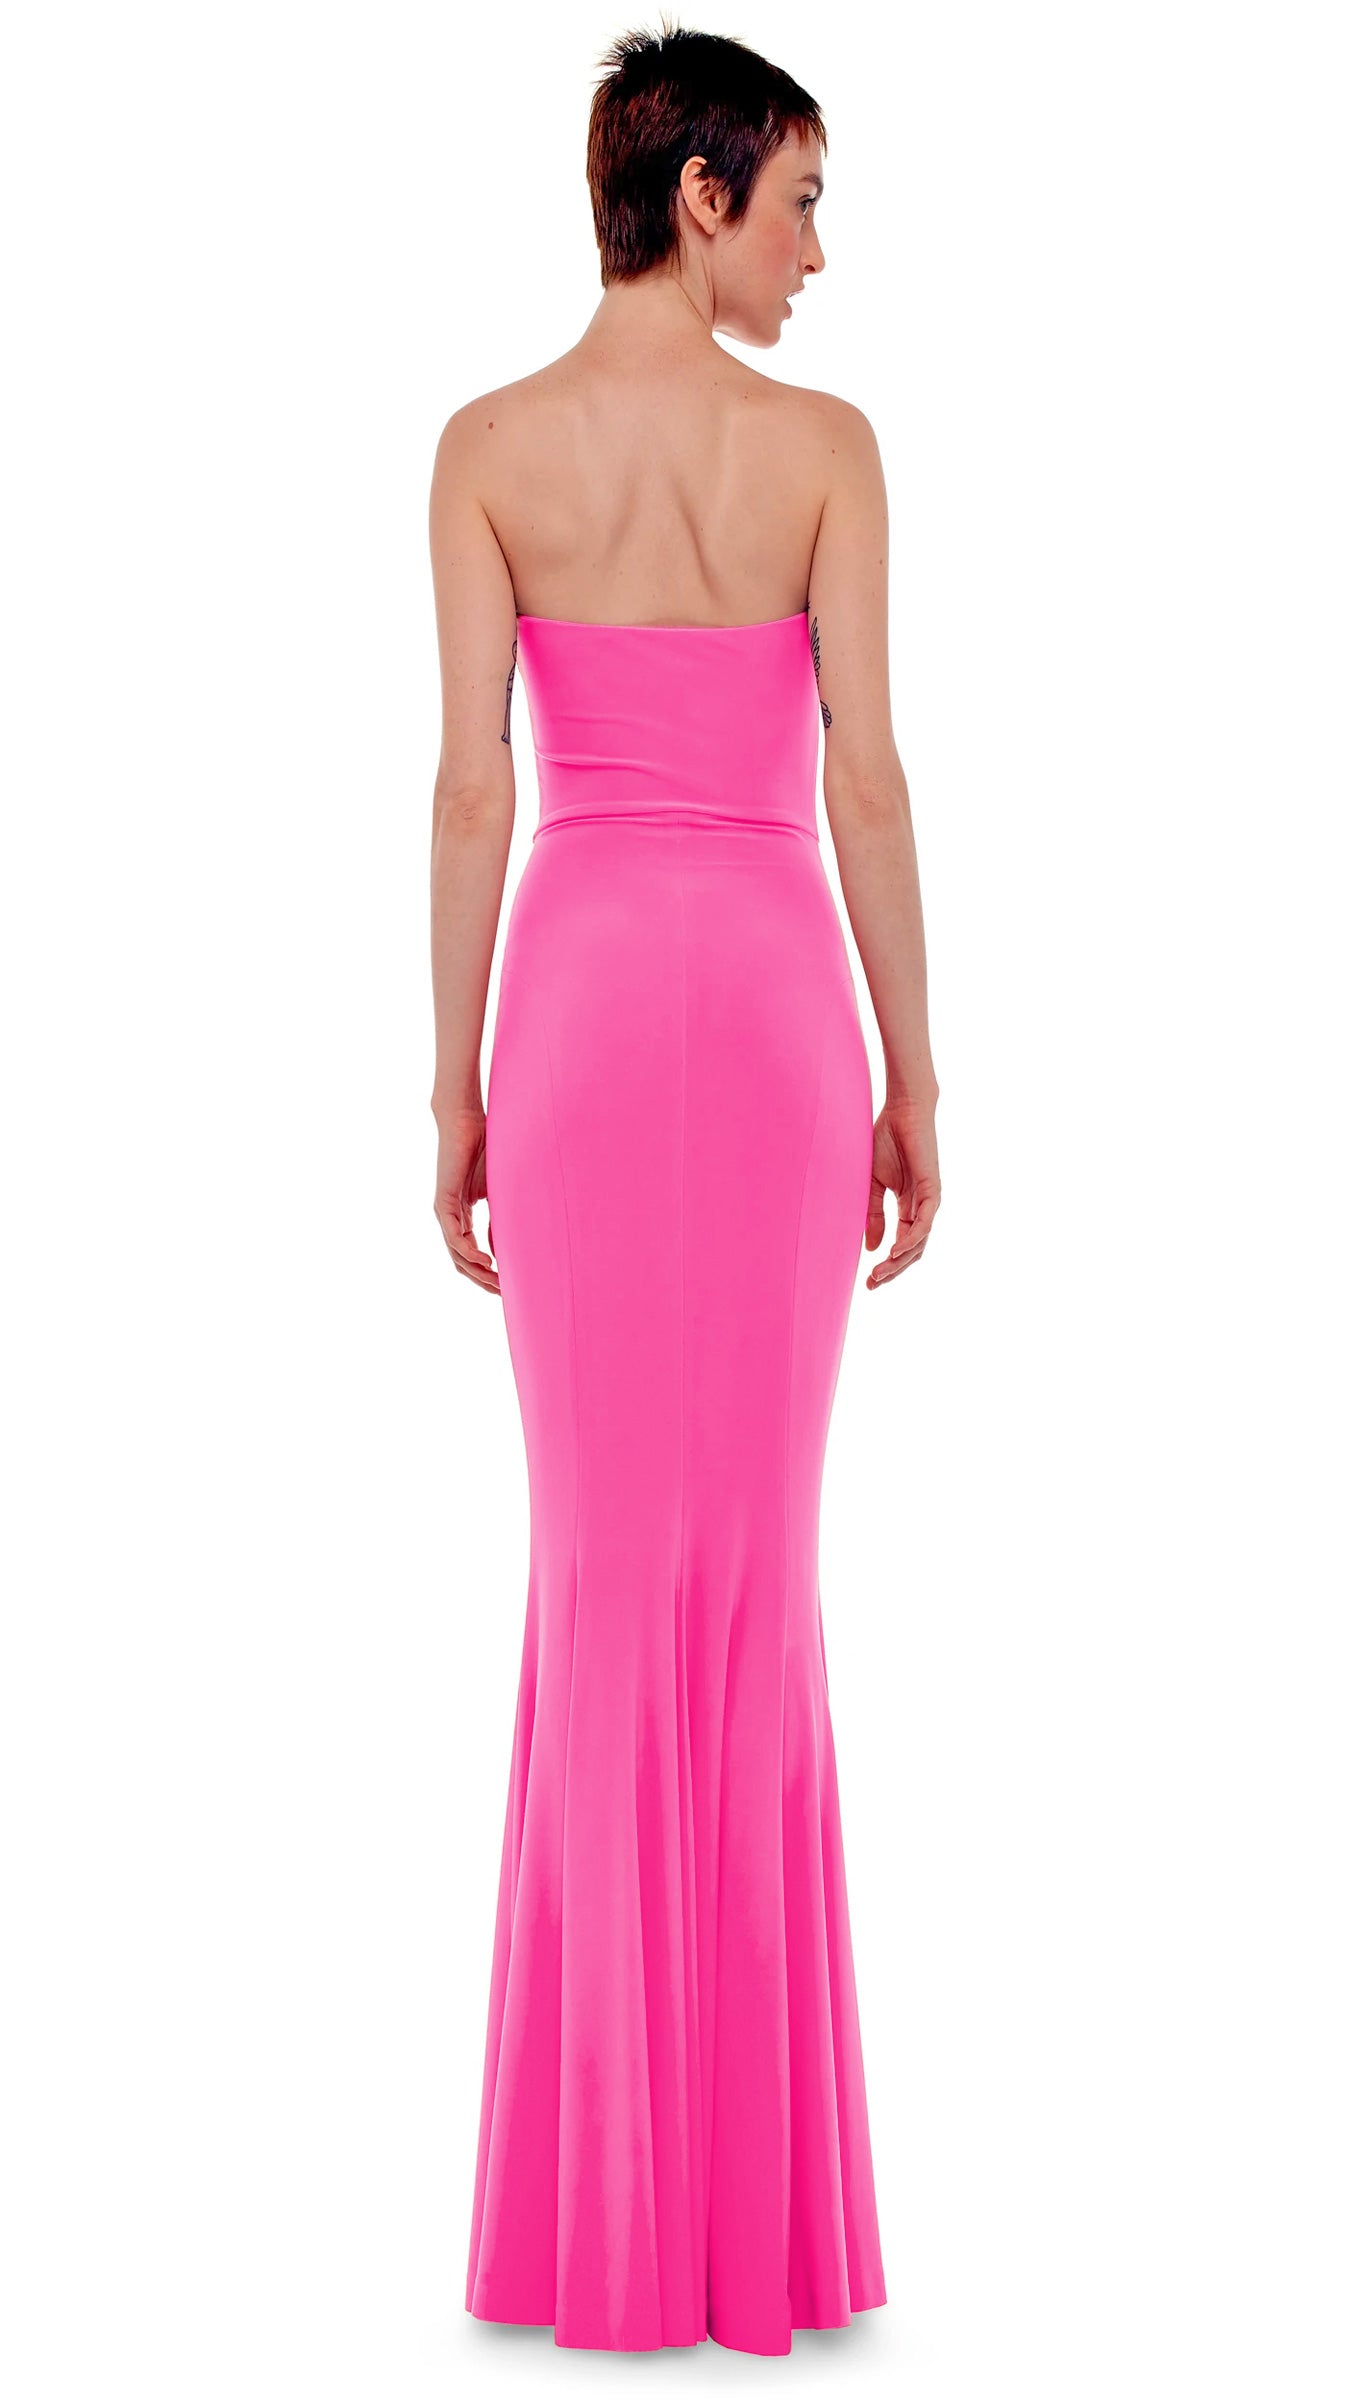 STRAPLESS FISHTAIL GOWN – Norma Kamali